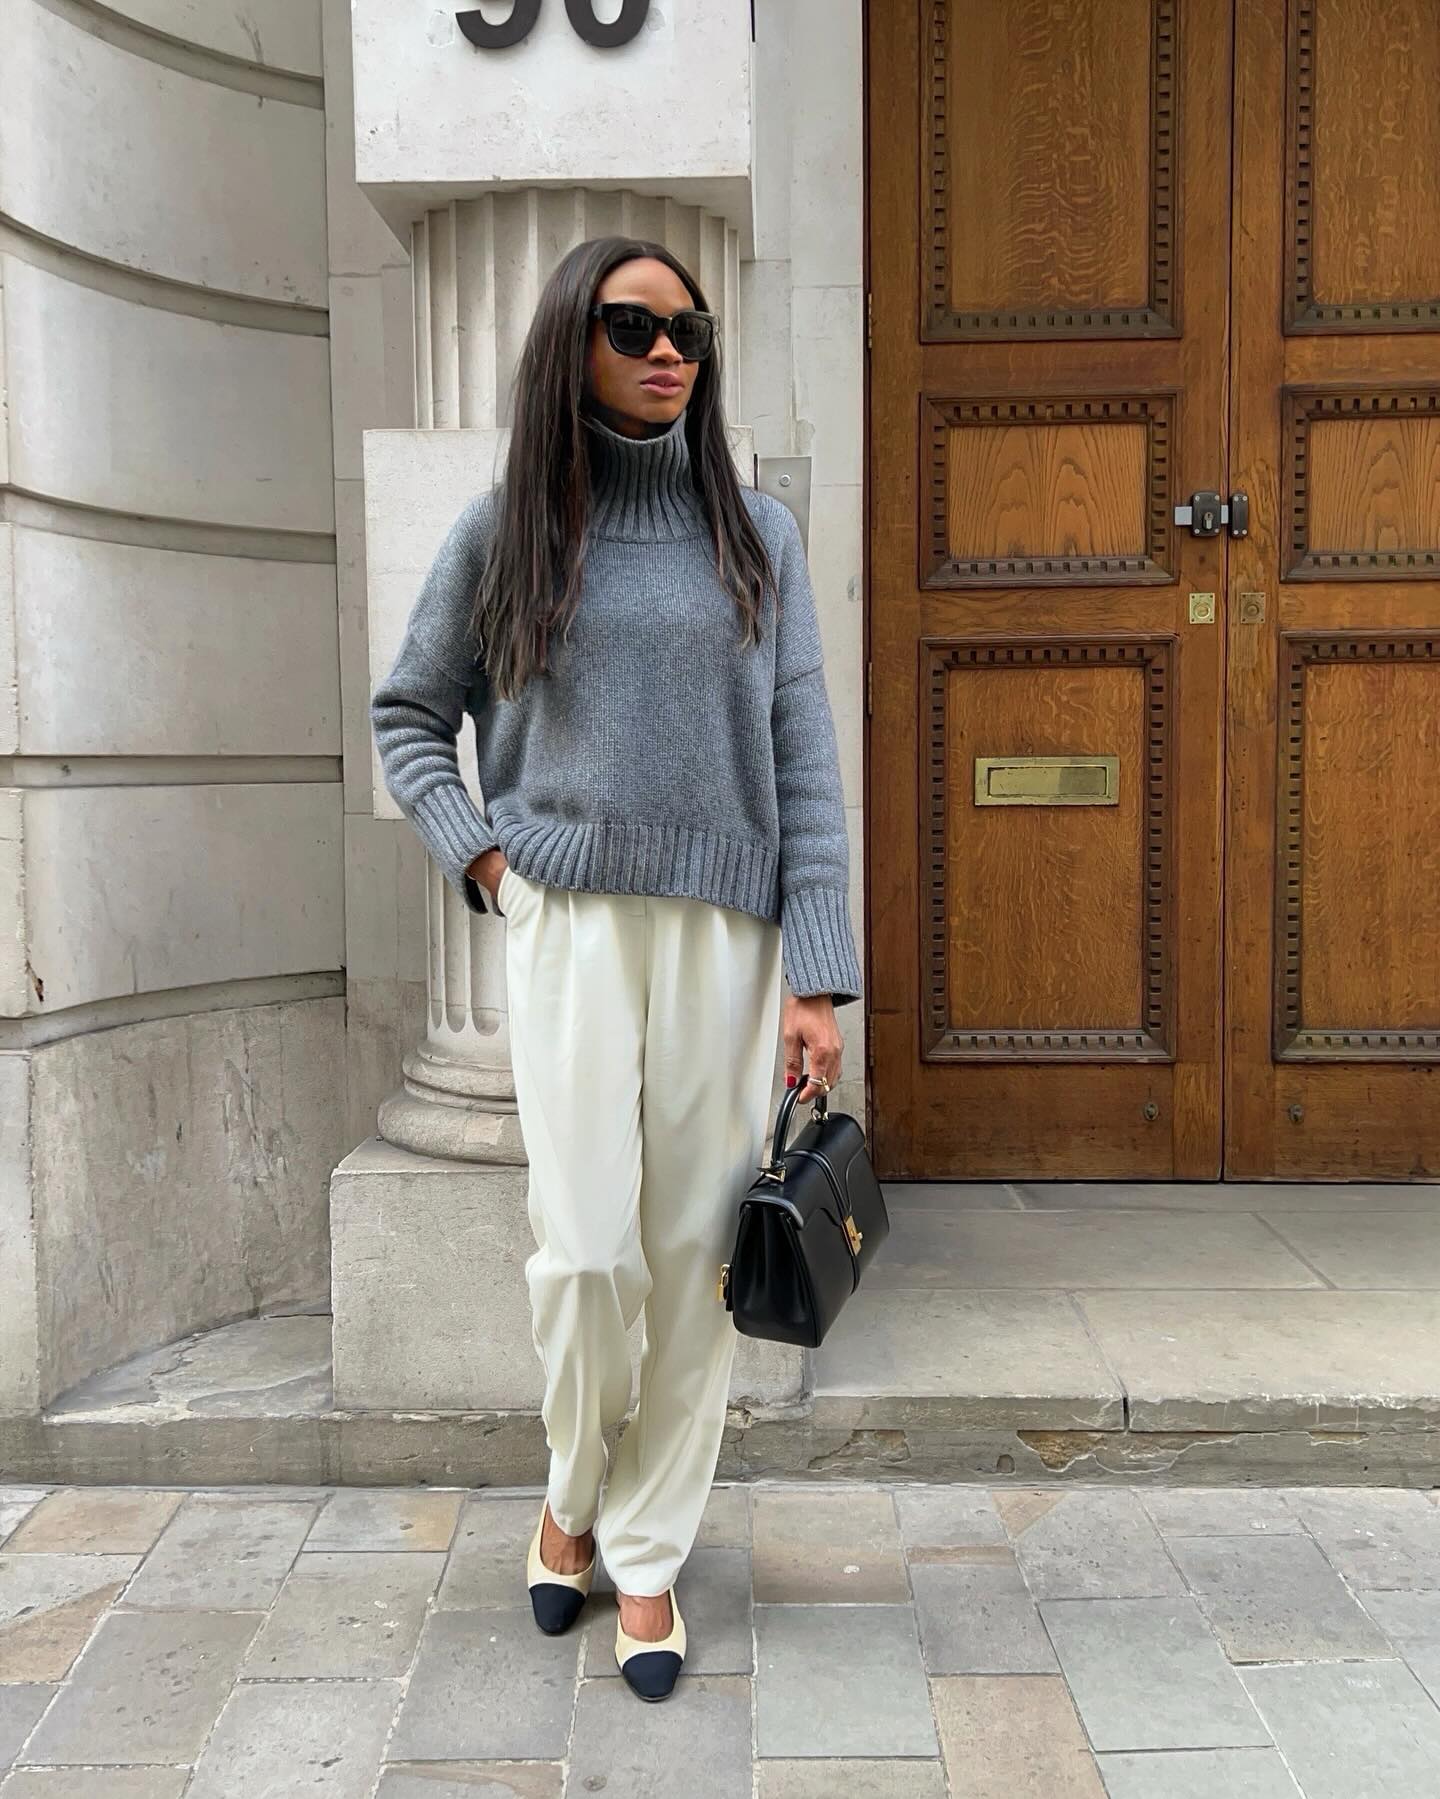 Influencer wears cream trousers with a gray sweater.